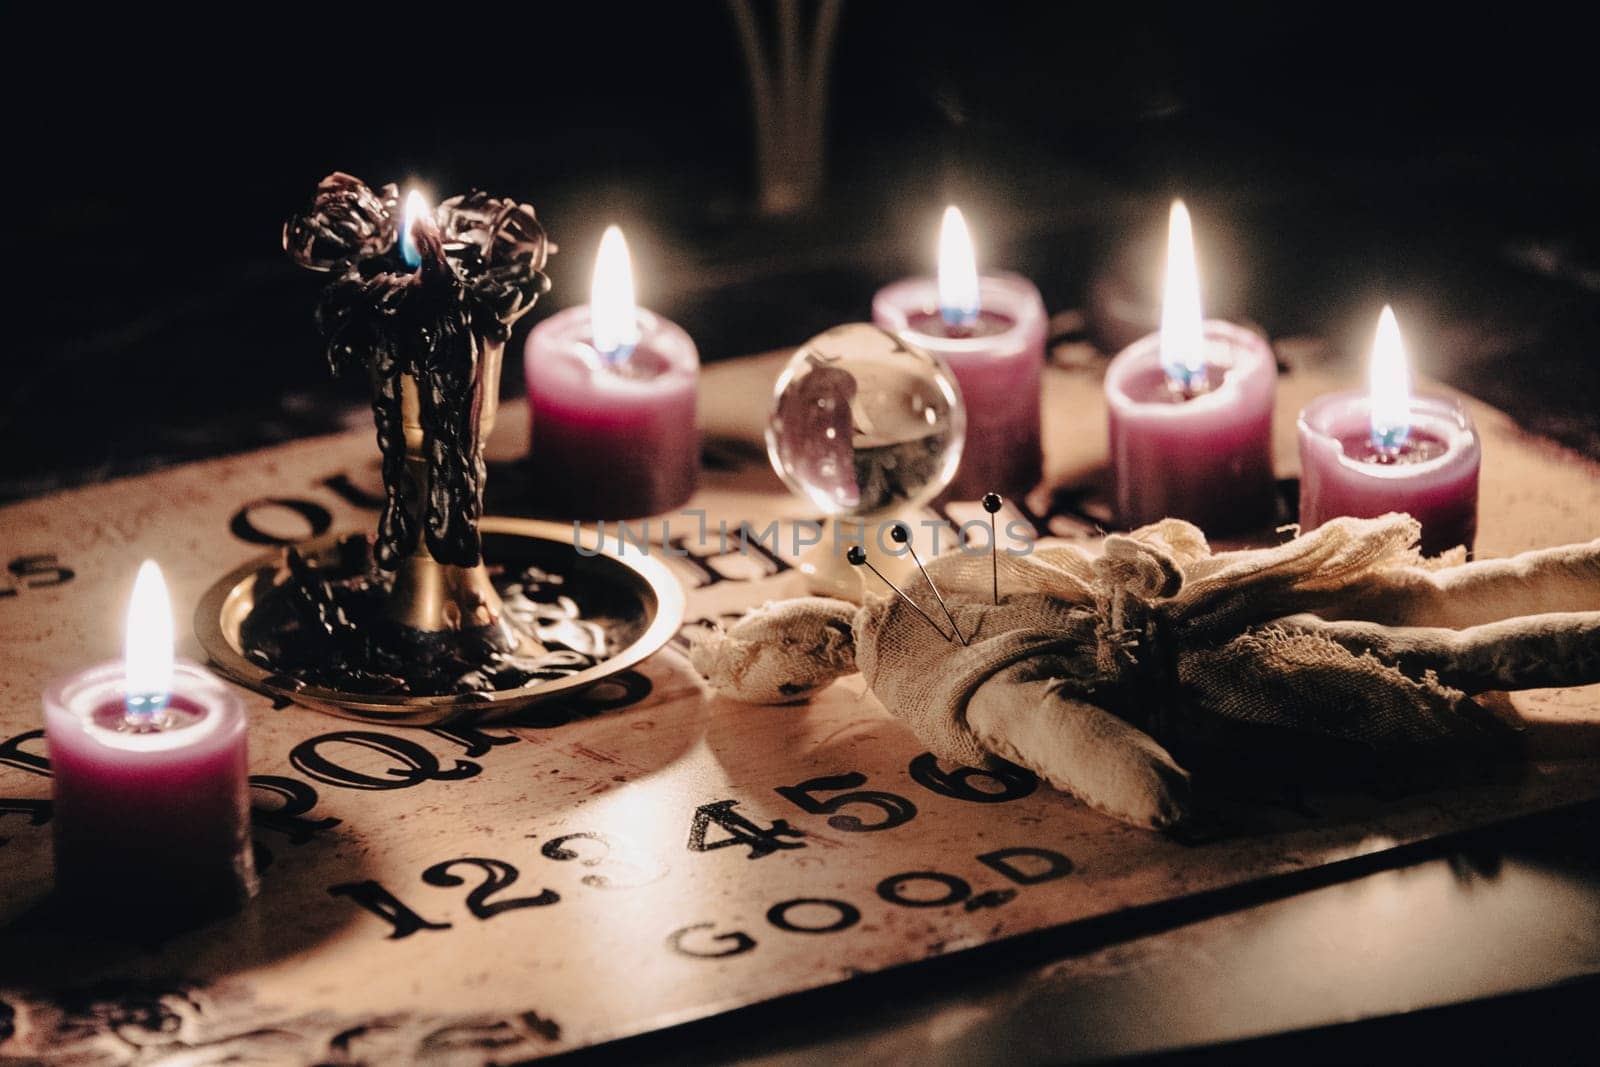 A mystical scene with a crystal ball surrounded by candles, suggesting fortune telling or a séance